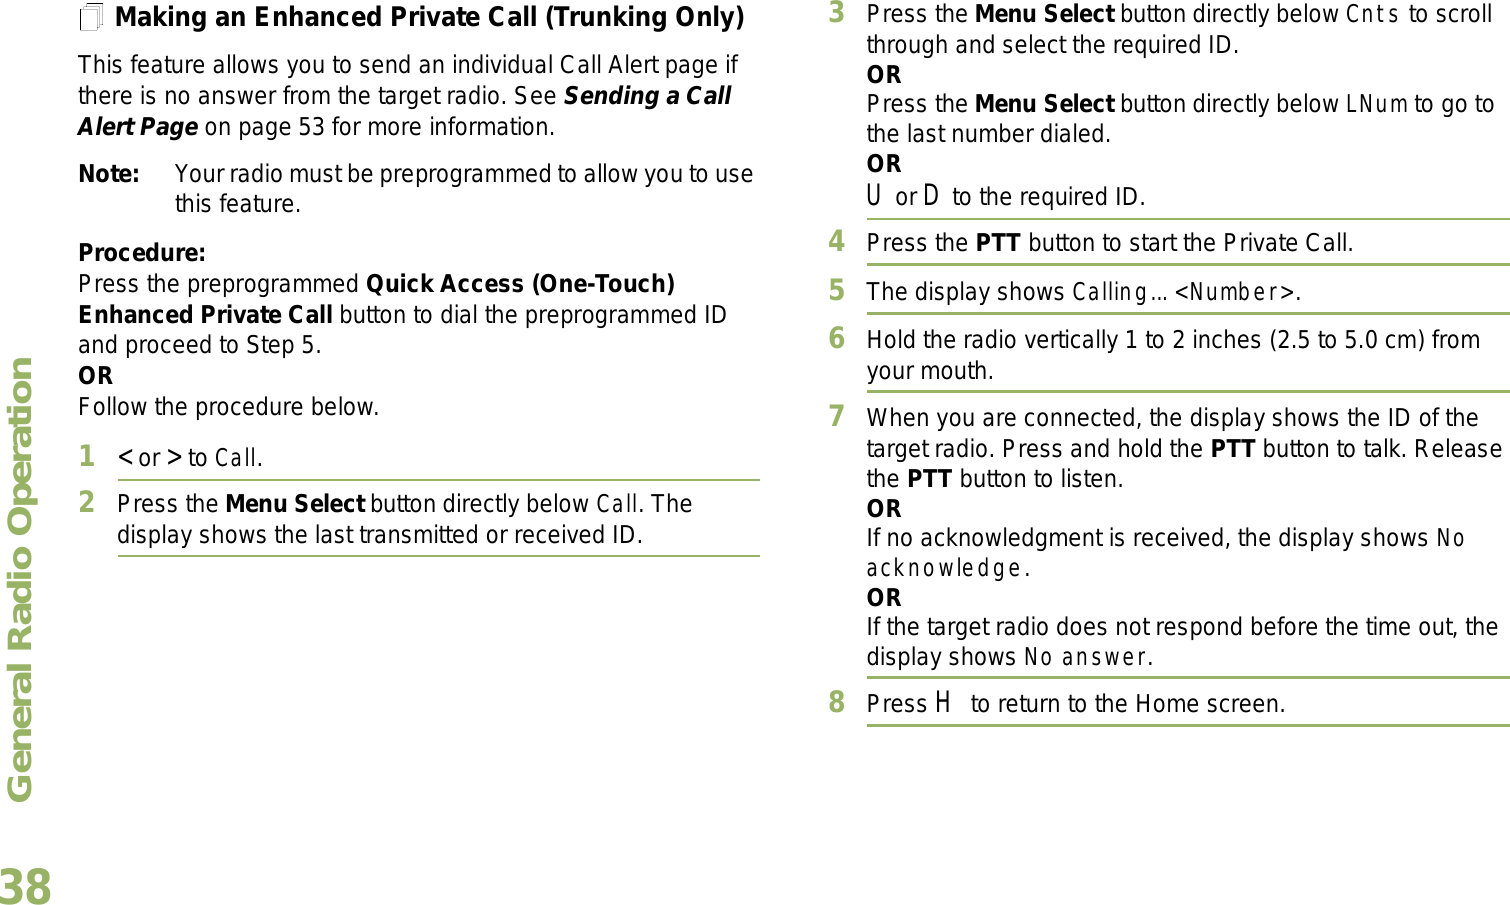 General Radio OperationEnglish38Making an Enhanced Private Call (Trunking Only)This feature allows you to send an individual Call Alert page if there is no answer from the target radio. See Sending a Call Alert Page on page 53 for more information.Note: Your radio must be preprogrammed to allow you to use this feature.Procedure:Press the preprogrammed Quick Access (One-Touch) Enhanced Private Call button to dial the preprogrammed ID and proceed to Step 5. ORFollow the procedure below. 1&lt; or &gt; to Call.2Press the Menu Select button directly below Call. The display shows the last transmitted or received ID.3Press the Menu Select button directly below Cnts to scroll through and select the required ID.ORPress the Menu Select button directly below LNum to go to the last number dialed.ORU or D to the required ID.4Press the PTT button to start the Private Call.5The display shows Calling... &lt;Number&gt;.6Hold the radio vertically 1 to 2 inches (2.5 to 5.0 cm) from your mouth.7When you are connected, the display shows the ID of the target radio. Press and hold the PTT button to talk. Release the PTT button to listen.ORIf no acknowledgment is received, the display shows No acknowledge.ORIf the target radio does not respond before the time out, the display shows No answer.8Press H to return to the Home screen.